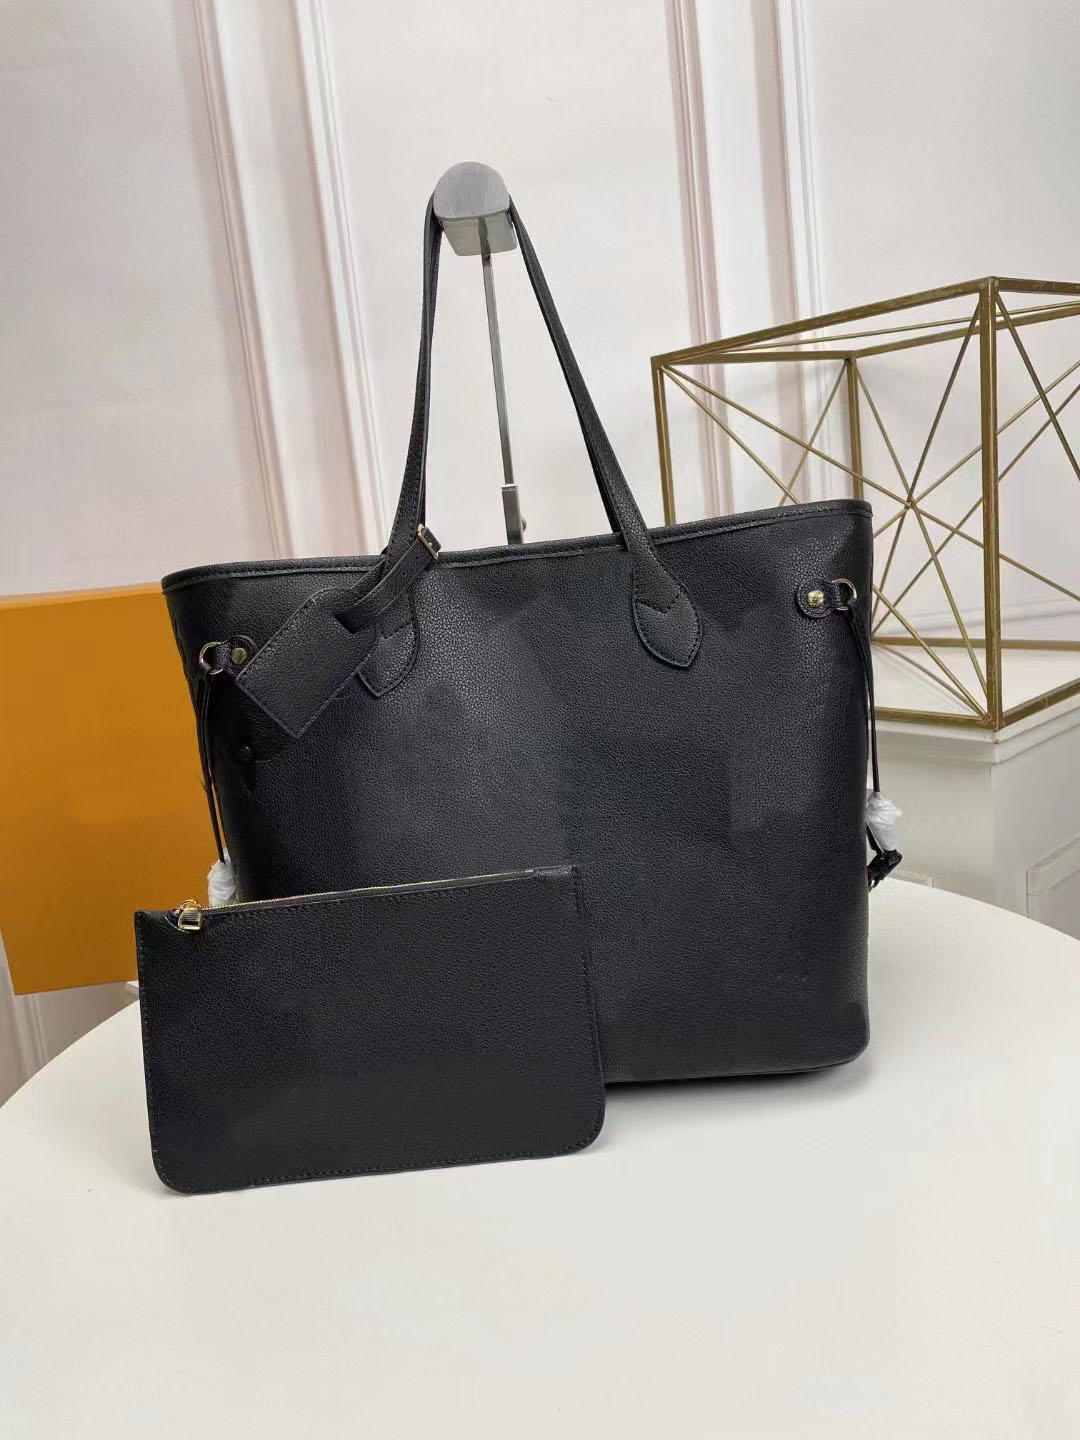 

High Quality Designer Tote Bag Women Wild at Heart Shopping Genuine Leather MM Handbags Shoulder Balck Embossing Empreinte luxurious Bags Totes, White embossing